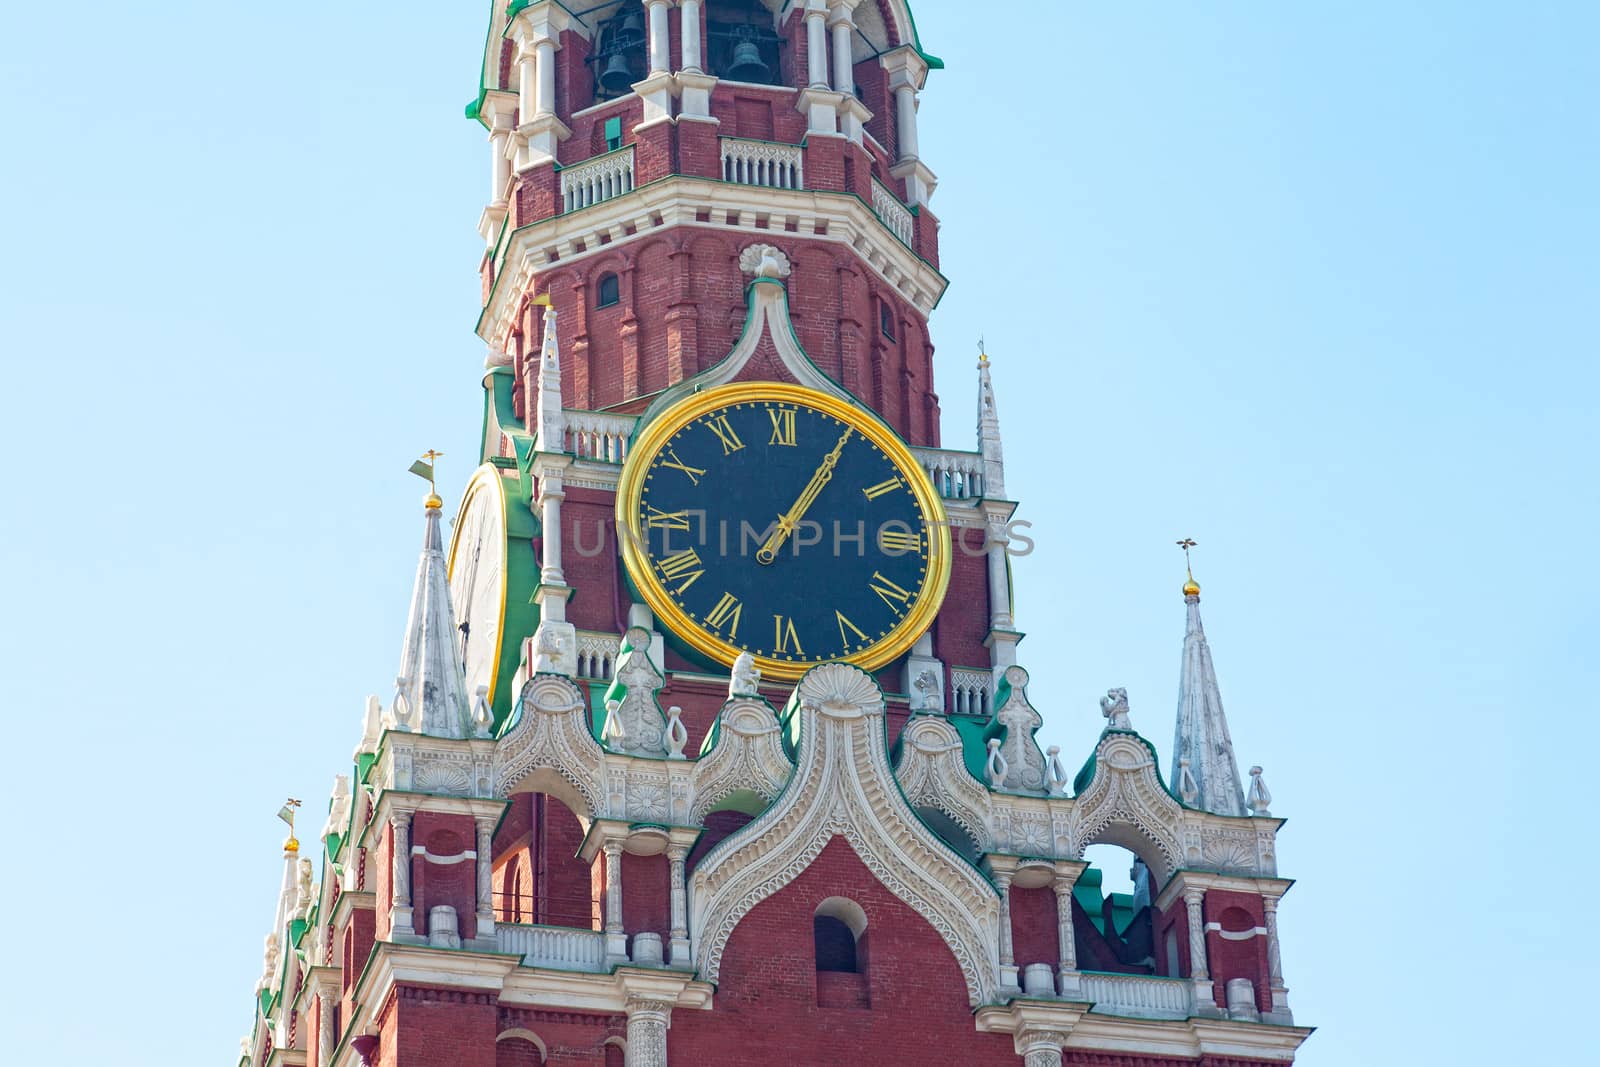 Chiming clock on the Spassky tower in the Moscow Kremlin, Russia